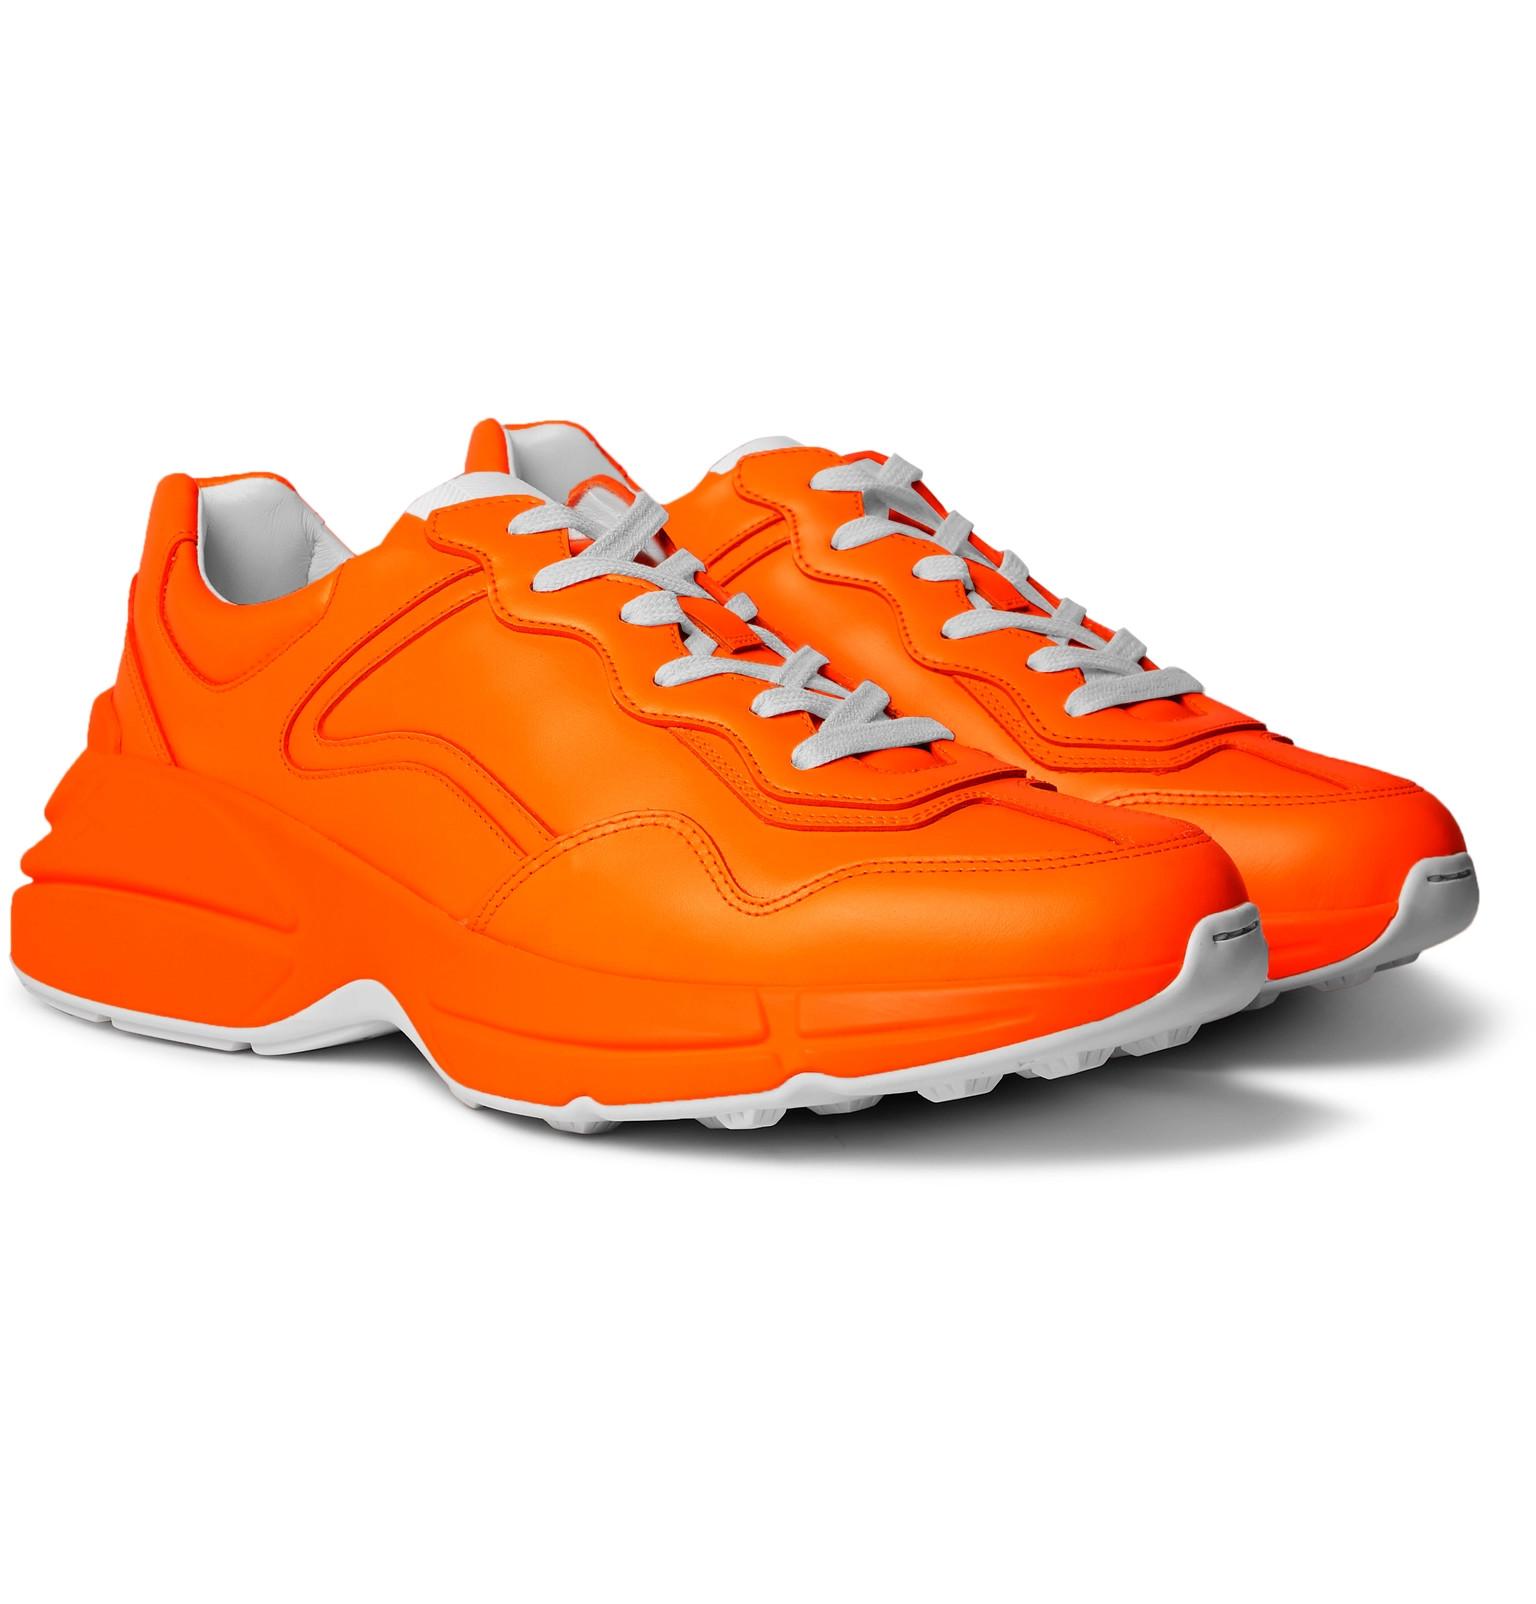 Gucci Rhyton Leather Sneakers in Orange for Men - Lyst